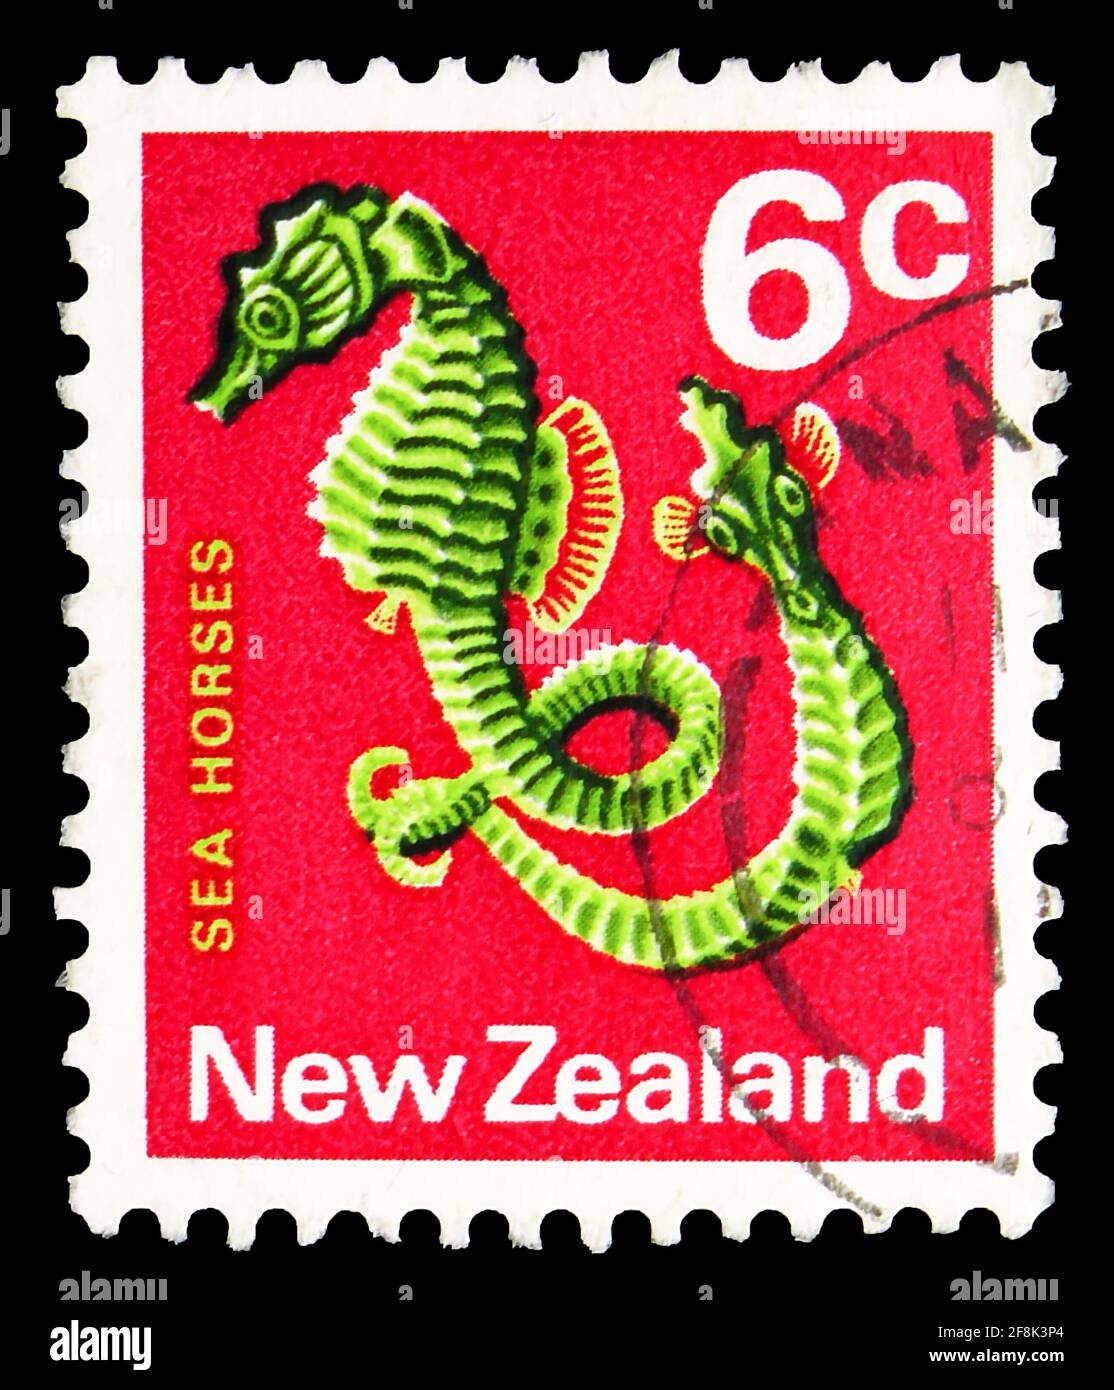 MOSCOW, RUSSIA - OCTOBER 7, 2019: Postage stamp printed in New Zealand shows Pot-bellied Seahorse (Hippocampus abdominalis), Definitives serie, 6 c - Stock Photo